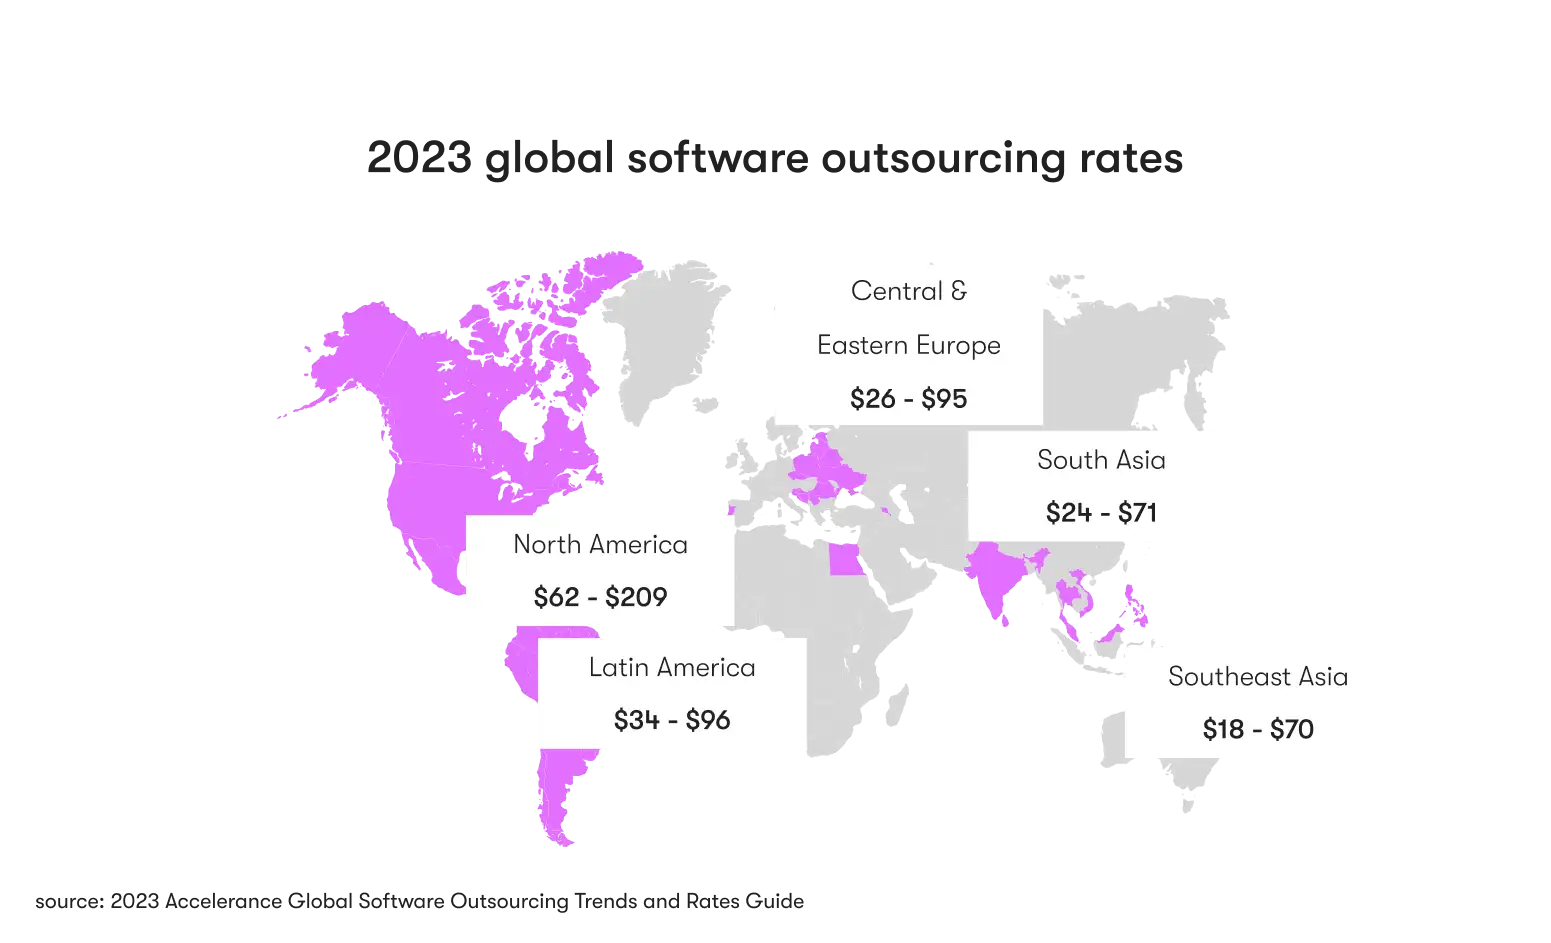 IT outsourcing costs by region